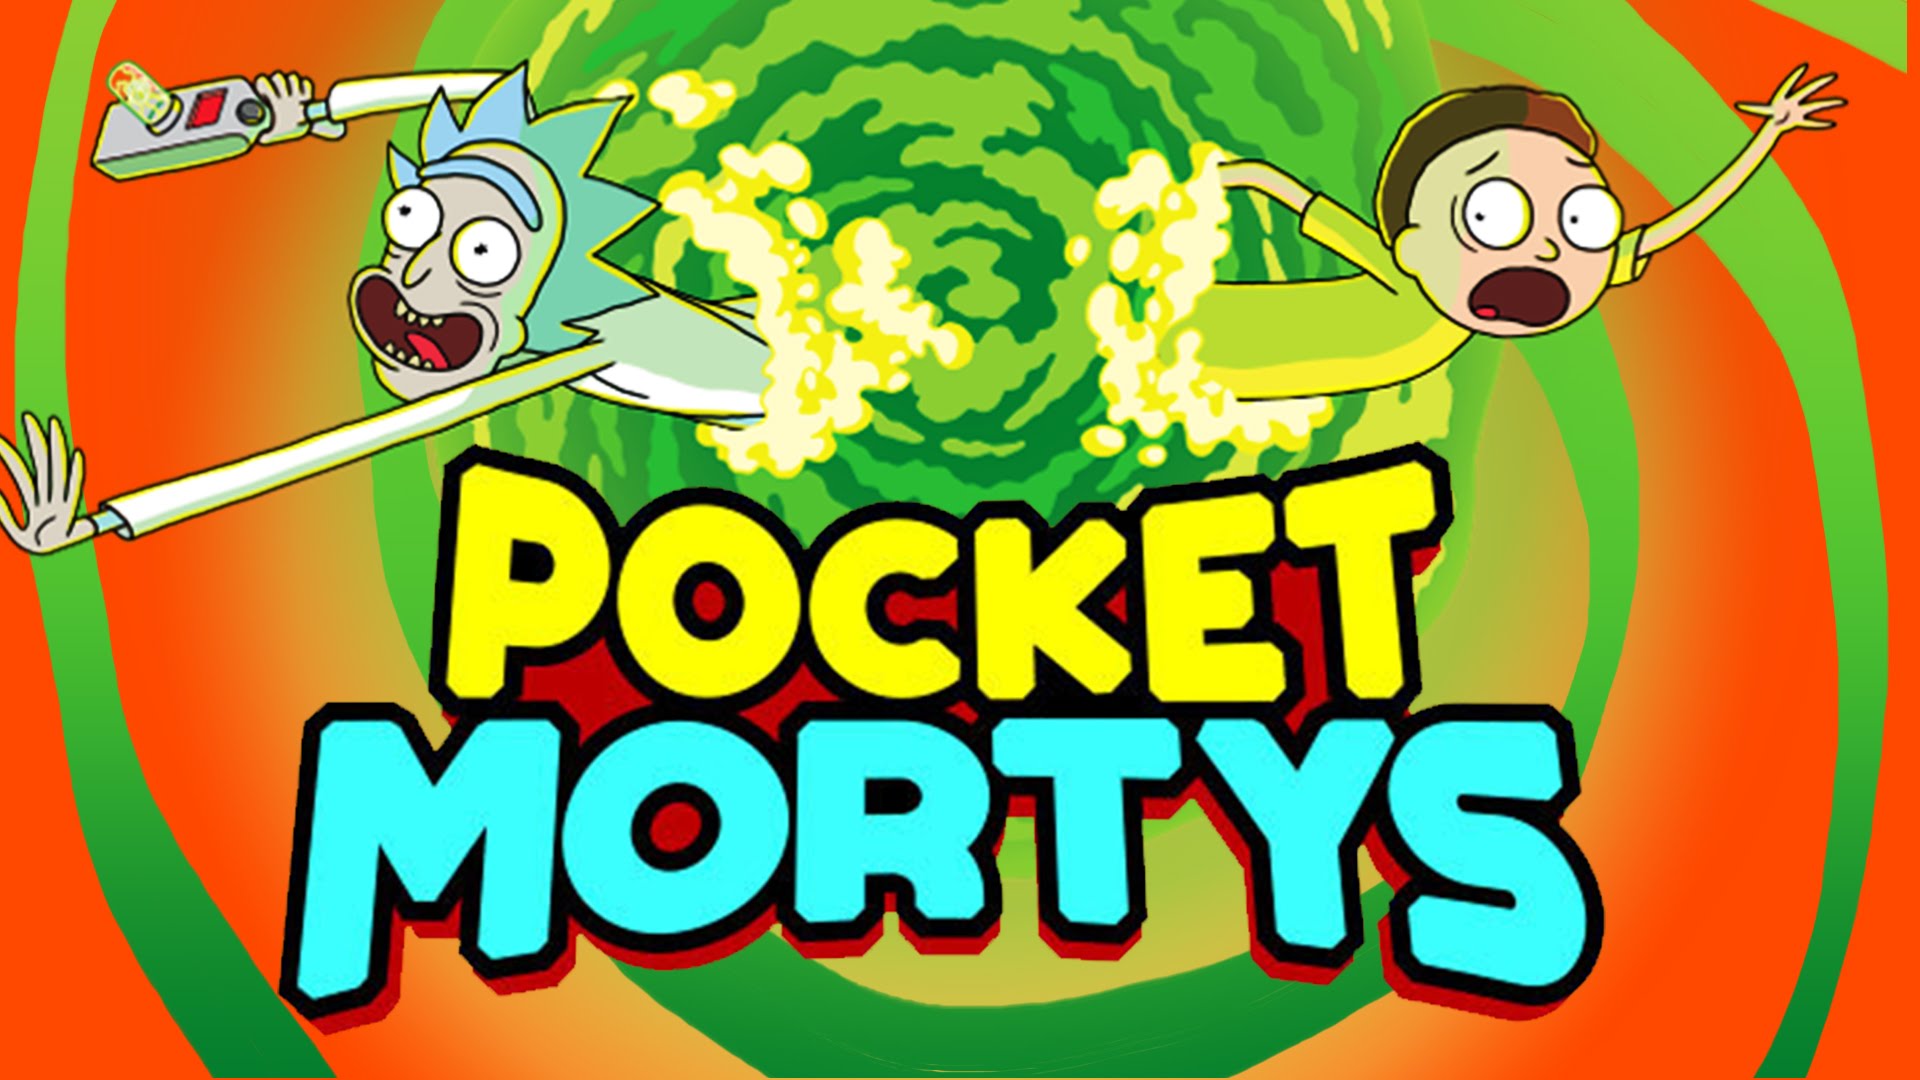 Video Game Rick and Morty: Pocket Mortys HD Wallpaper | Background Image